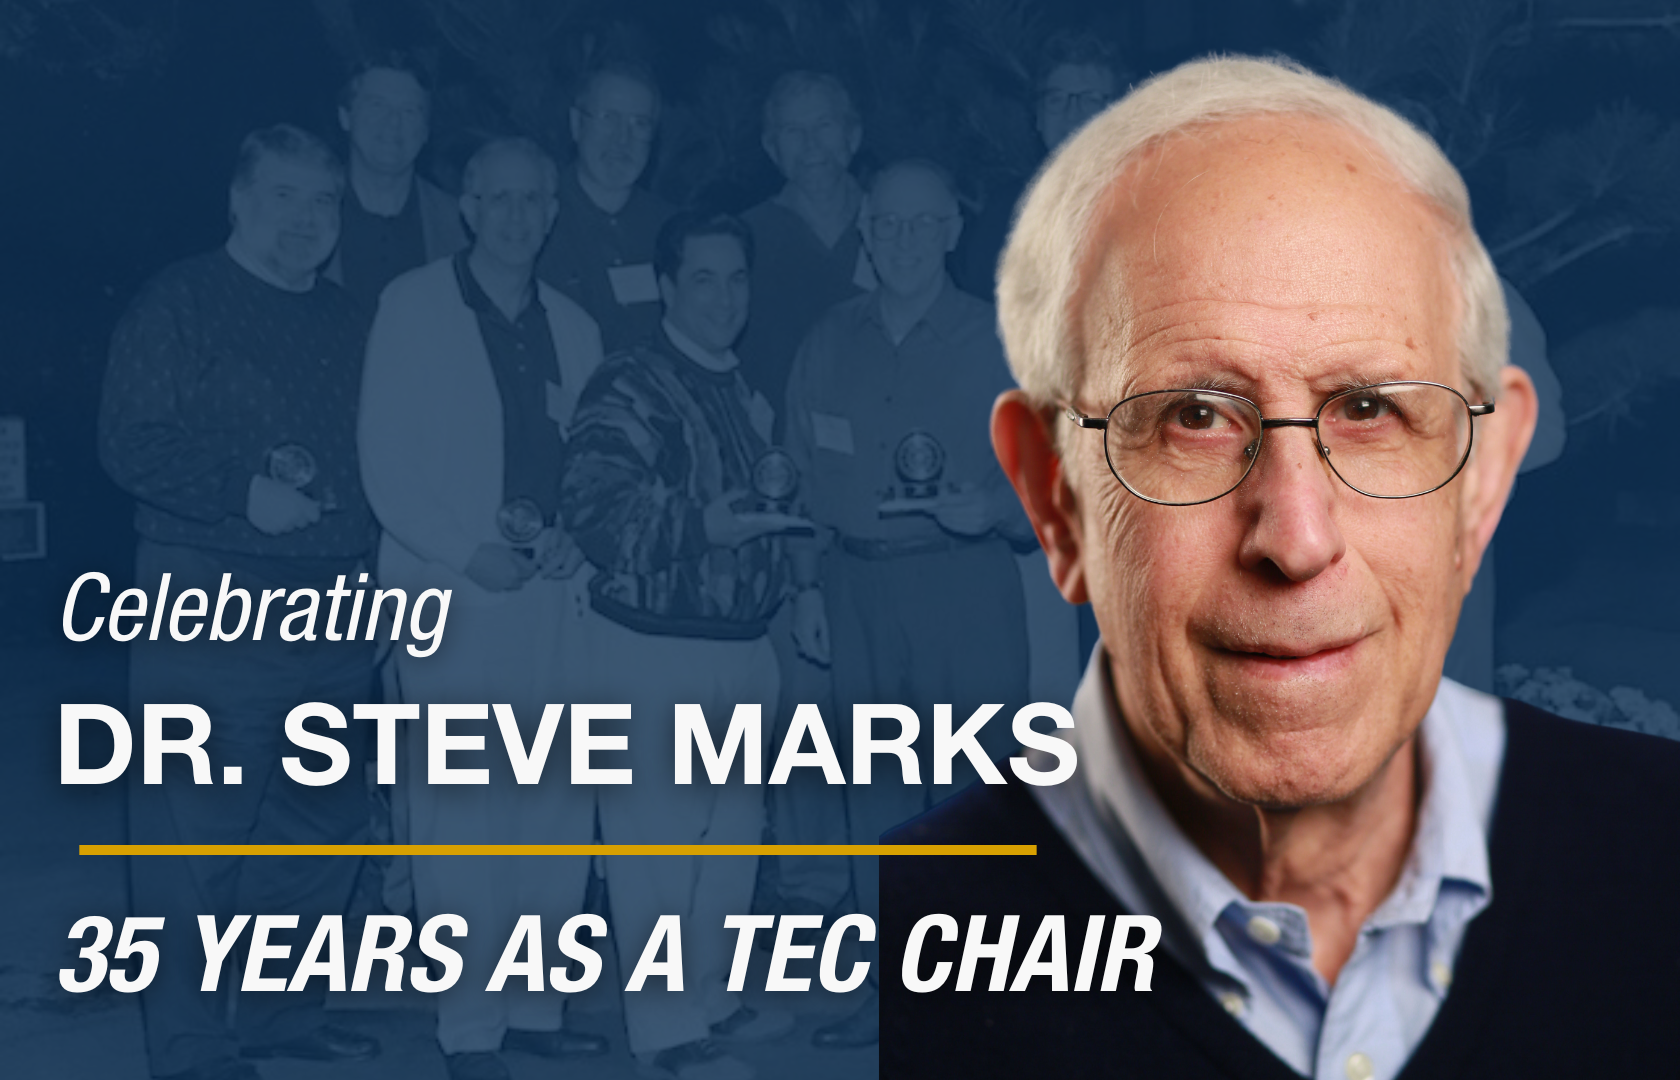 Celebrating Dr. Steve Marks - 35 Years a TEC Chair. With a headshot of Dr. Marks